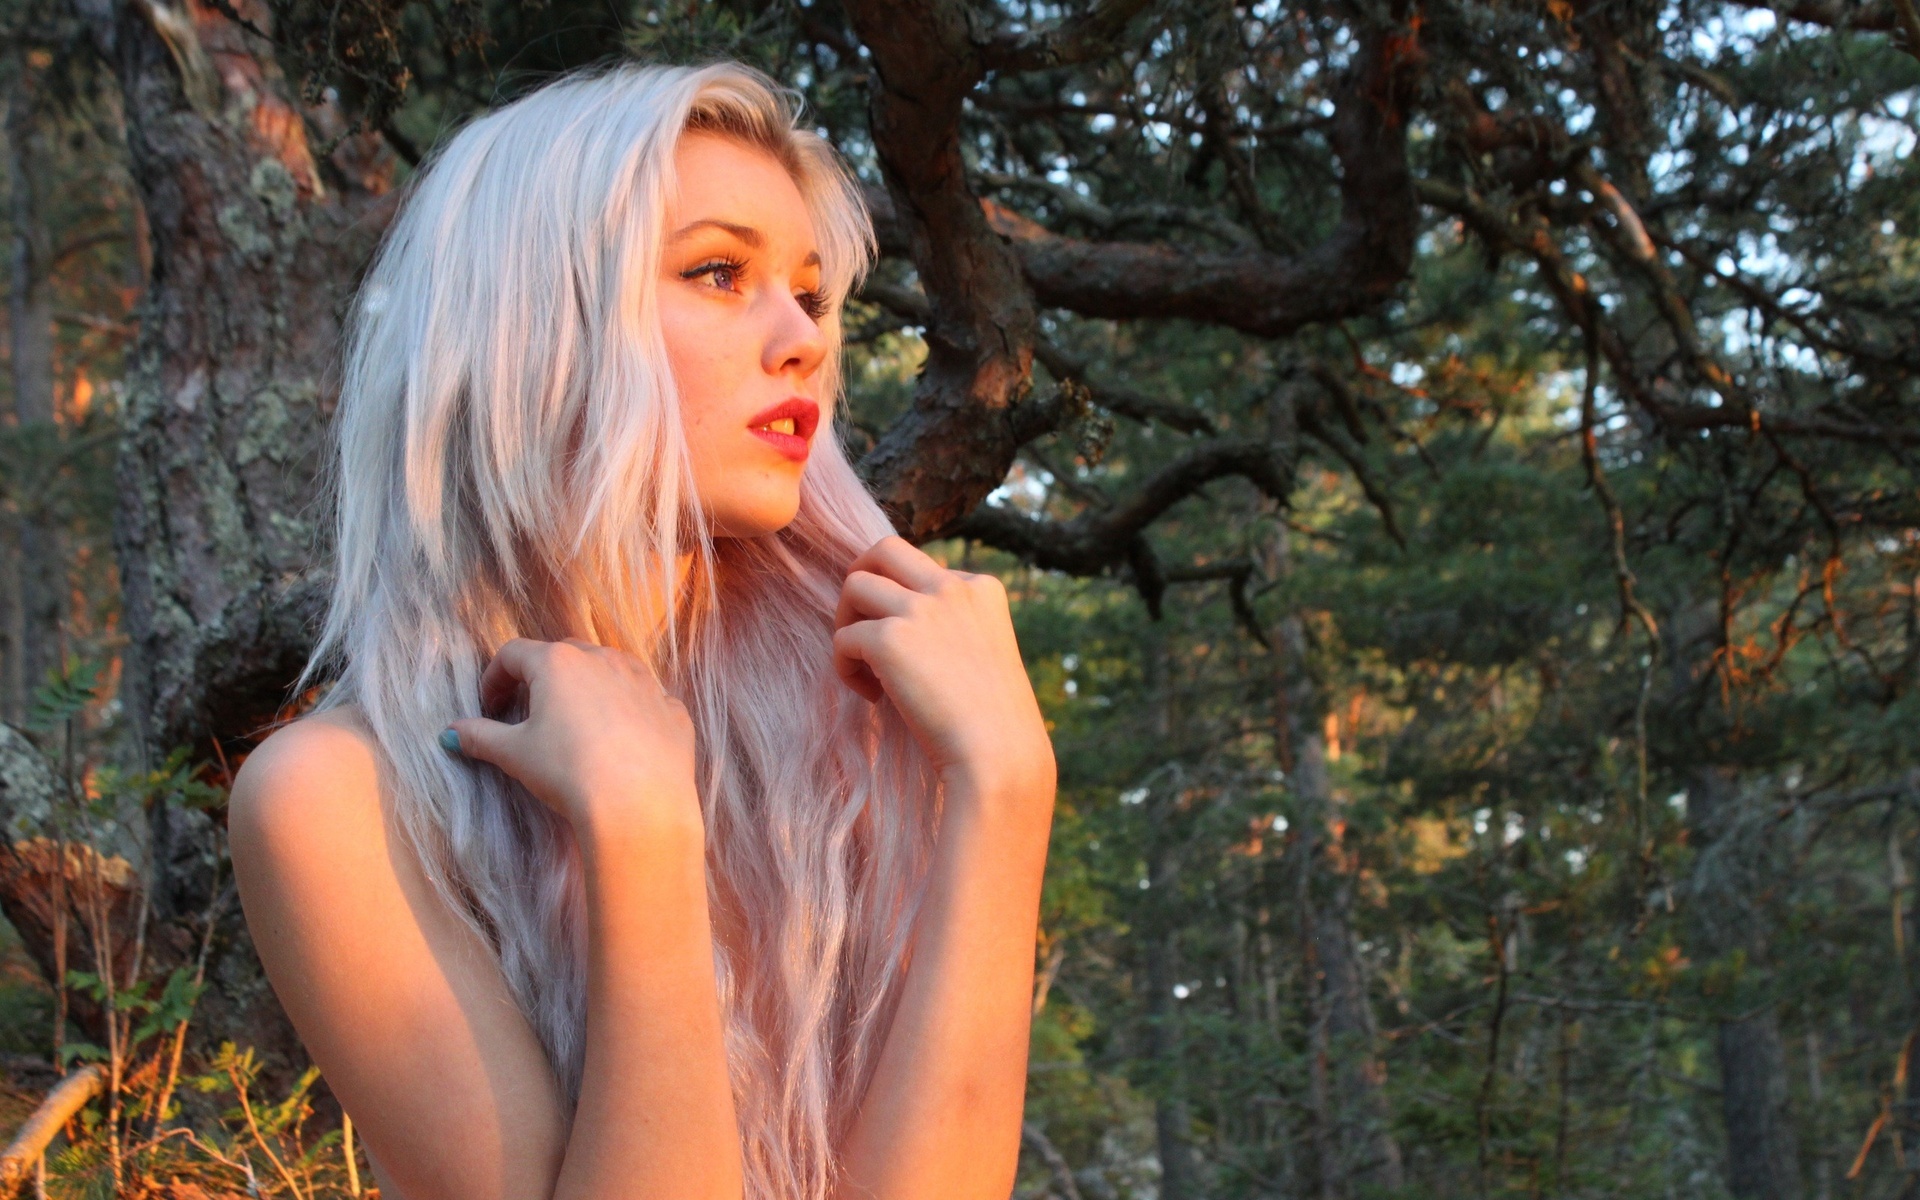 Women Platinum Blonde Blue Eyes Open Mouth Hands In Hair Looking Into The Distance Wood Women Outdoo 1920x1200